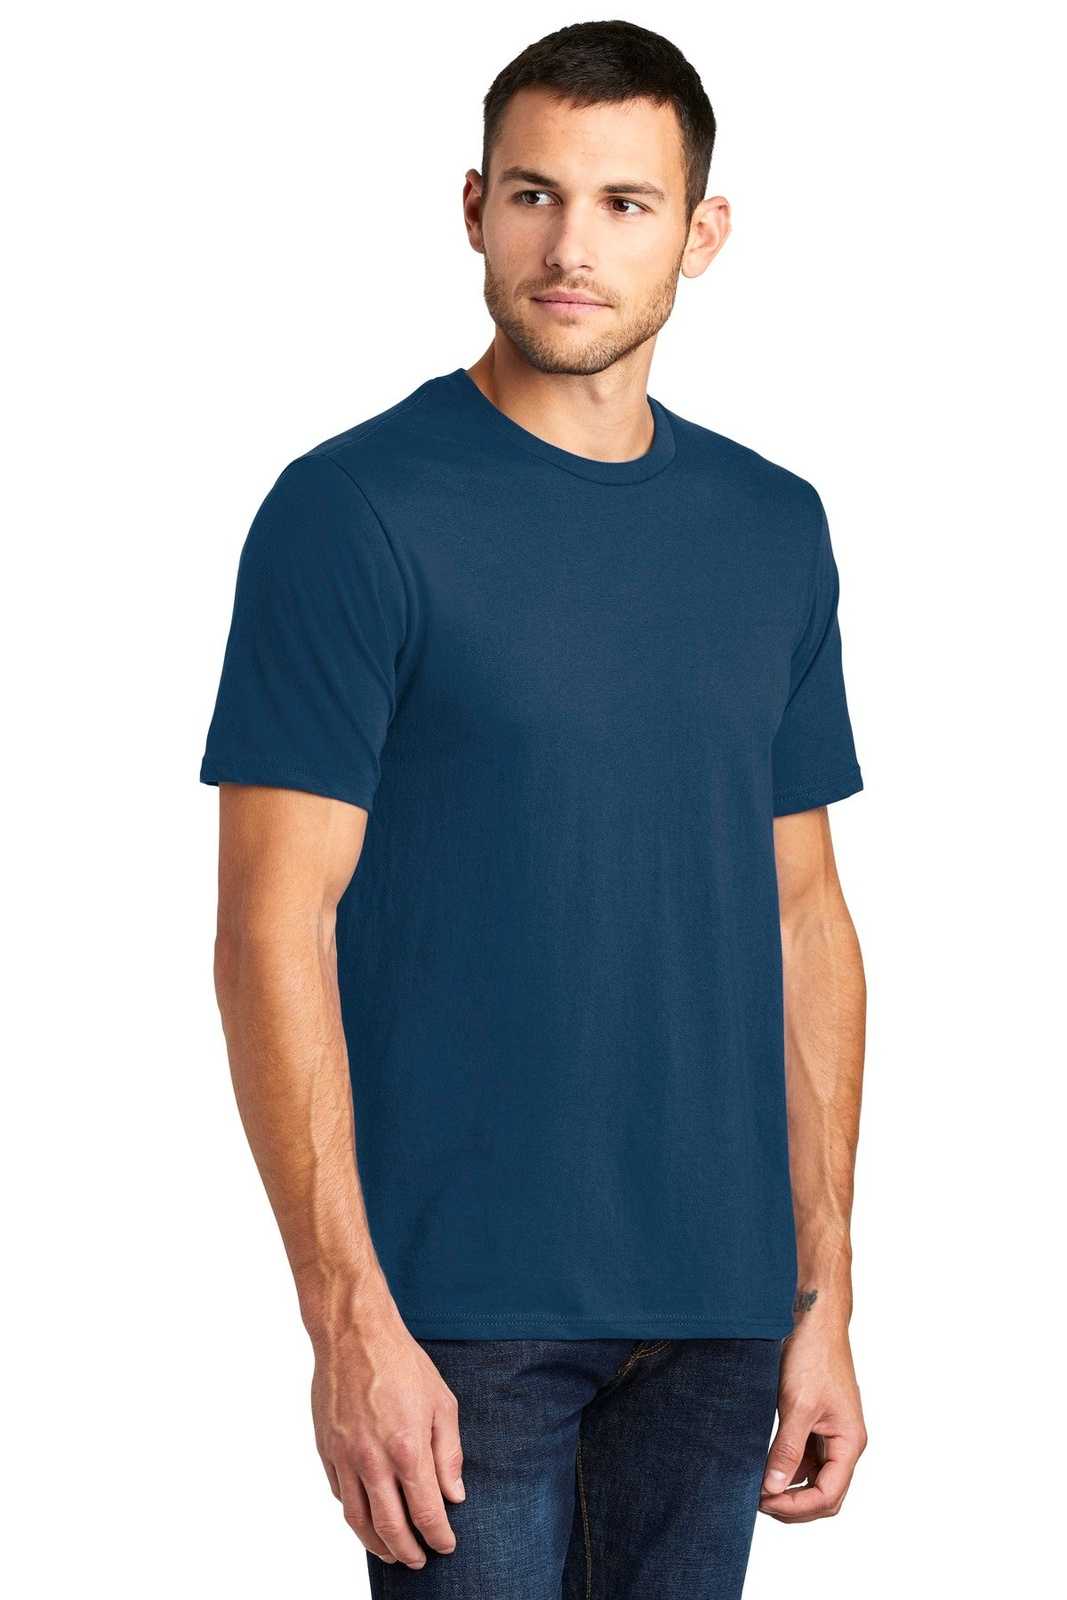 District DT6000 Very Important Tee - Neptune Blue - HIT a Double - 4